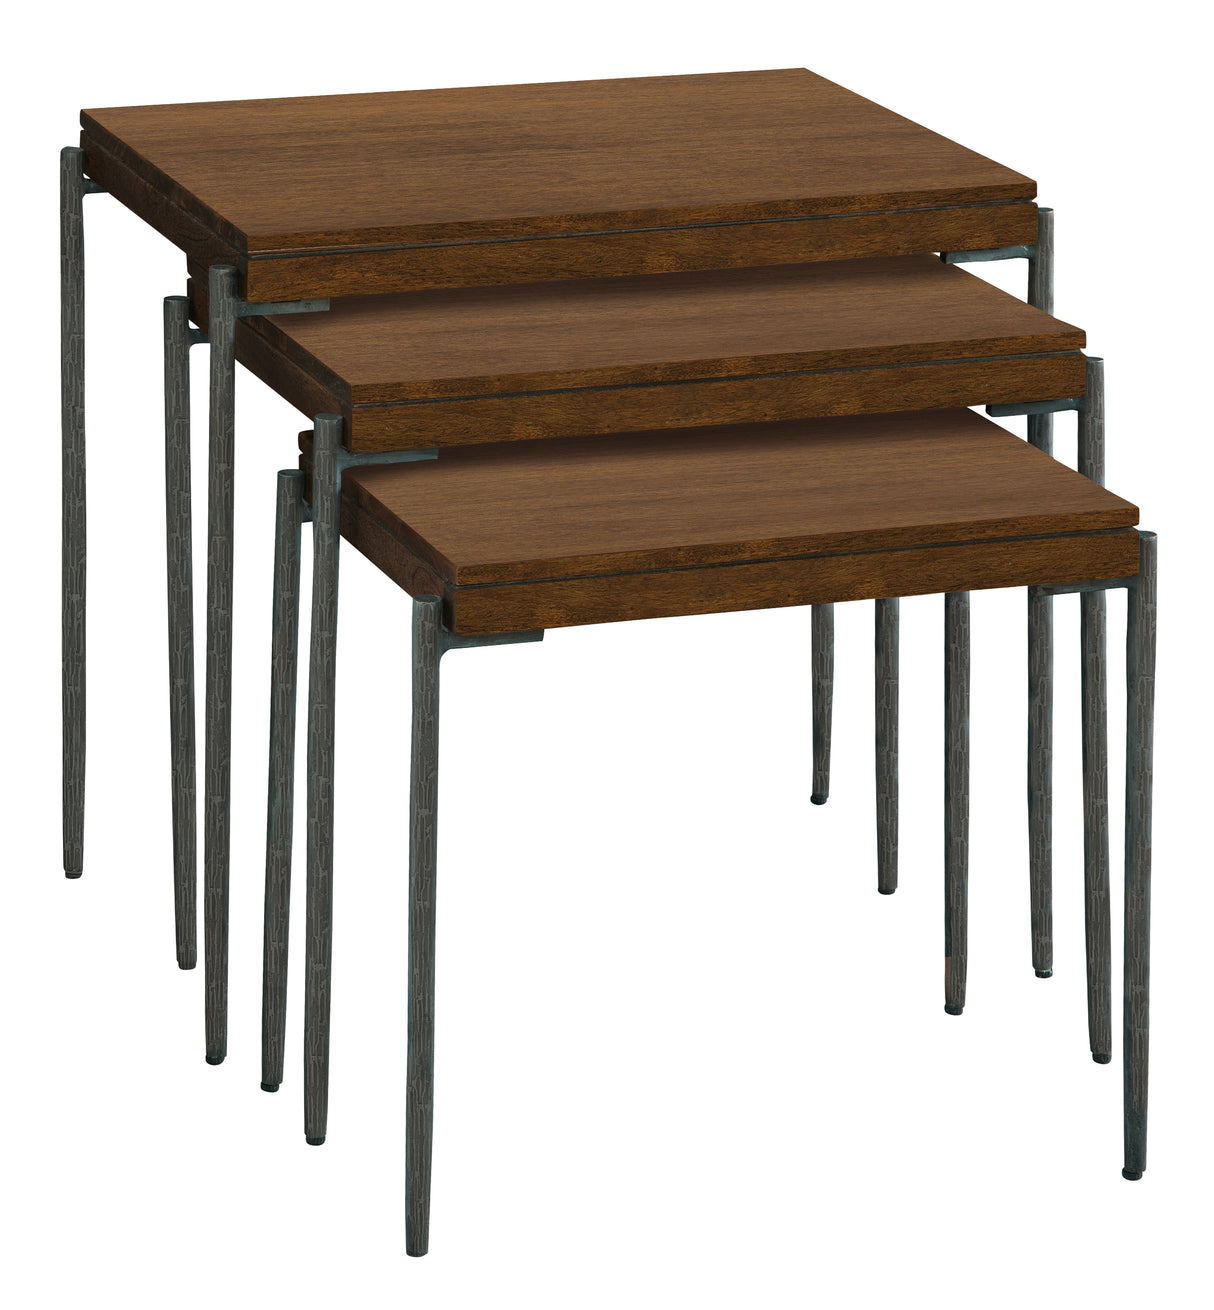 Hekman 26010 Bedford Park 24in. x 18in. x 25in. Nest of Tables